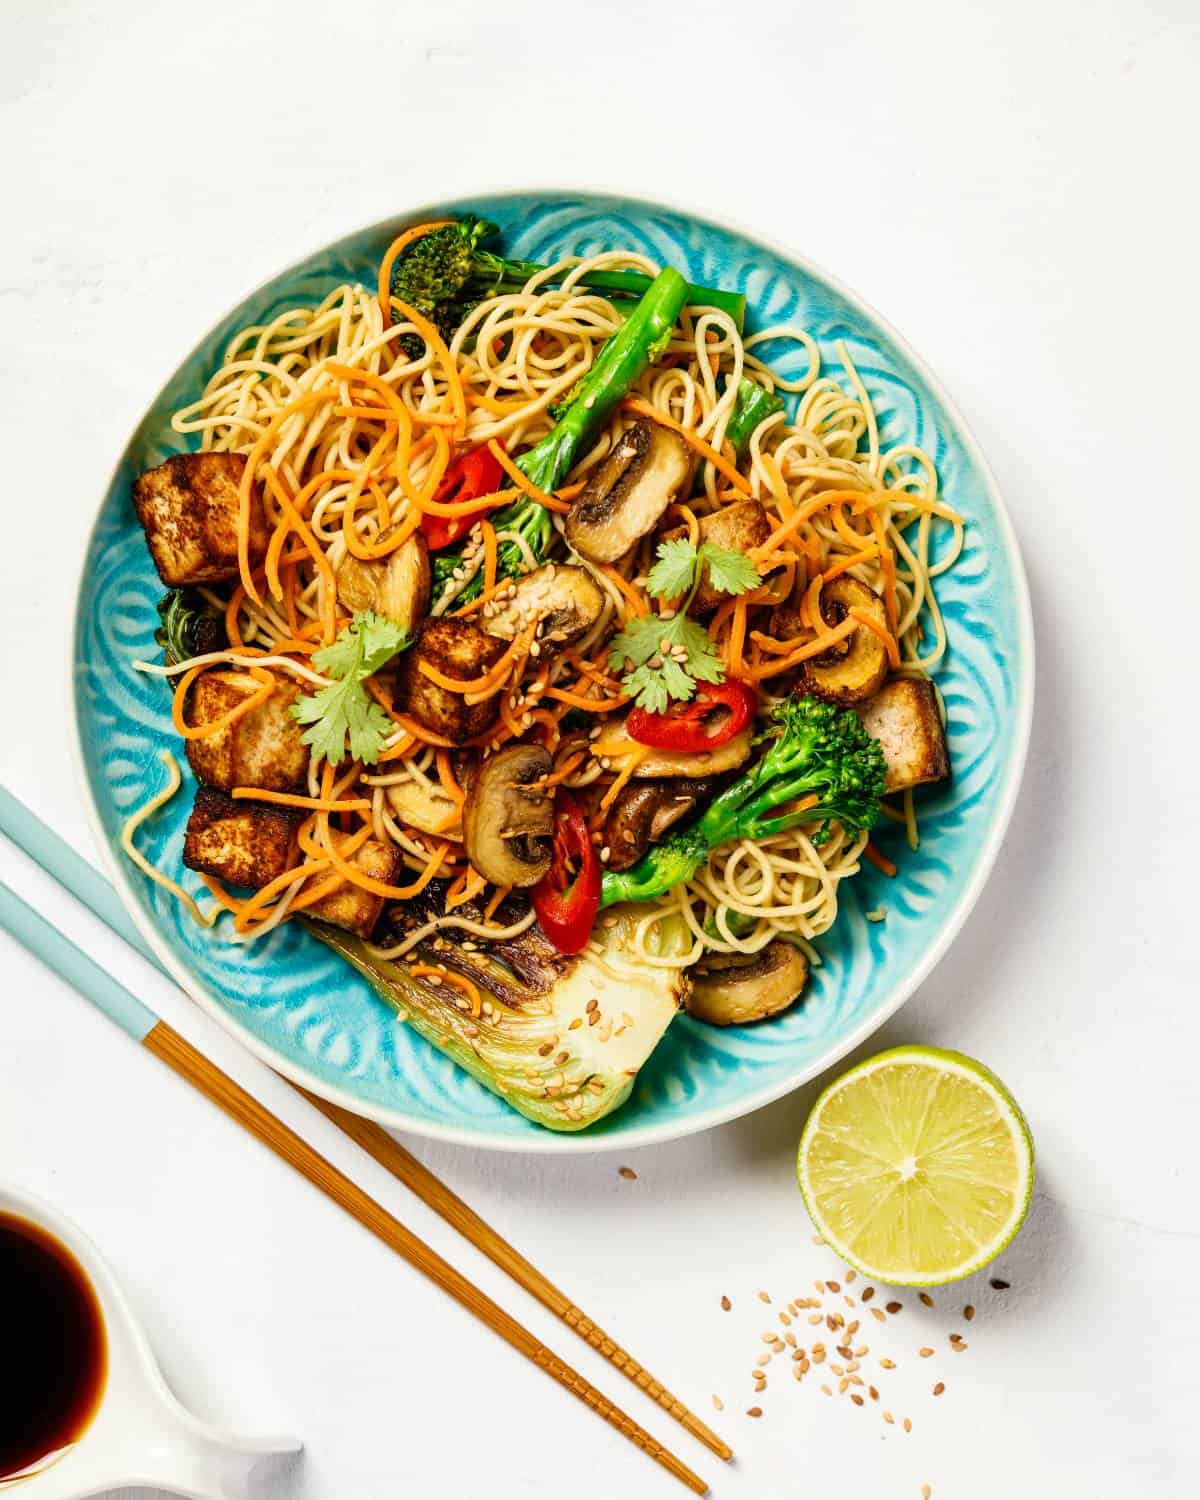 Vegetable stir fry with noodles, a soy sauce dipping bowl and chopsticks.